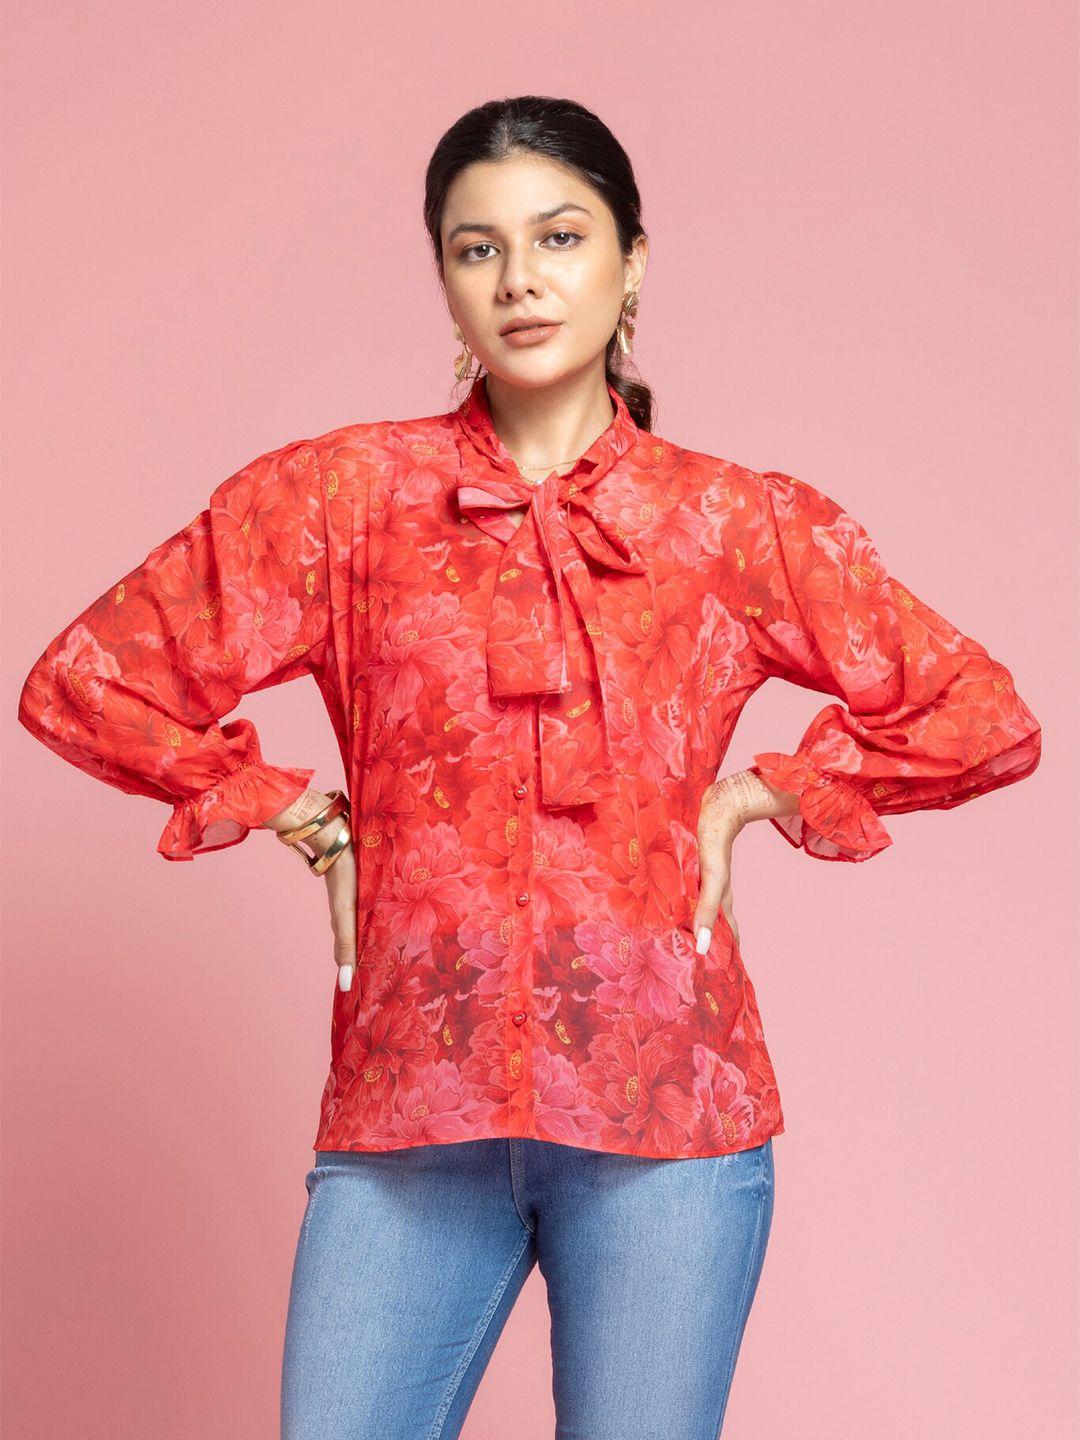 SEW YOU SOON Red Floral Print Tie-Up Neck Puff Sleeve Georgette Shirt Style Top